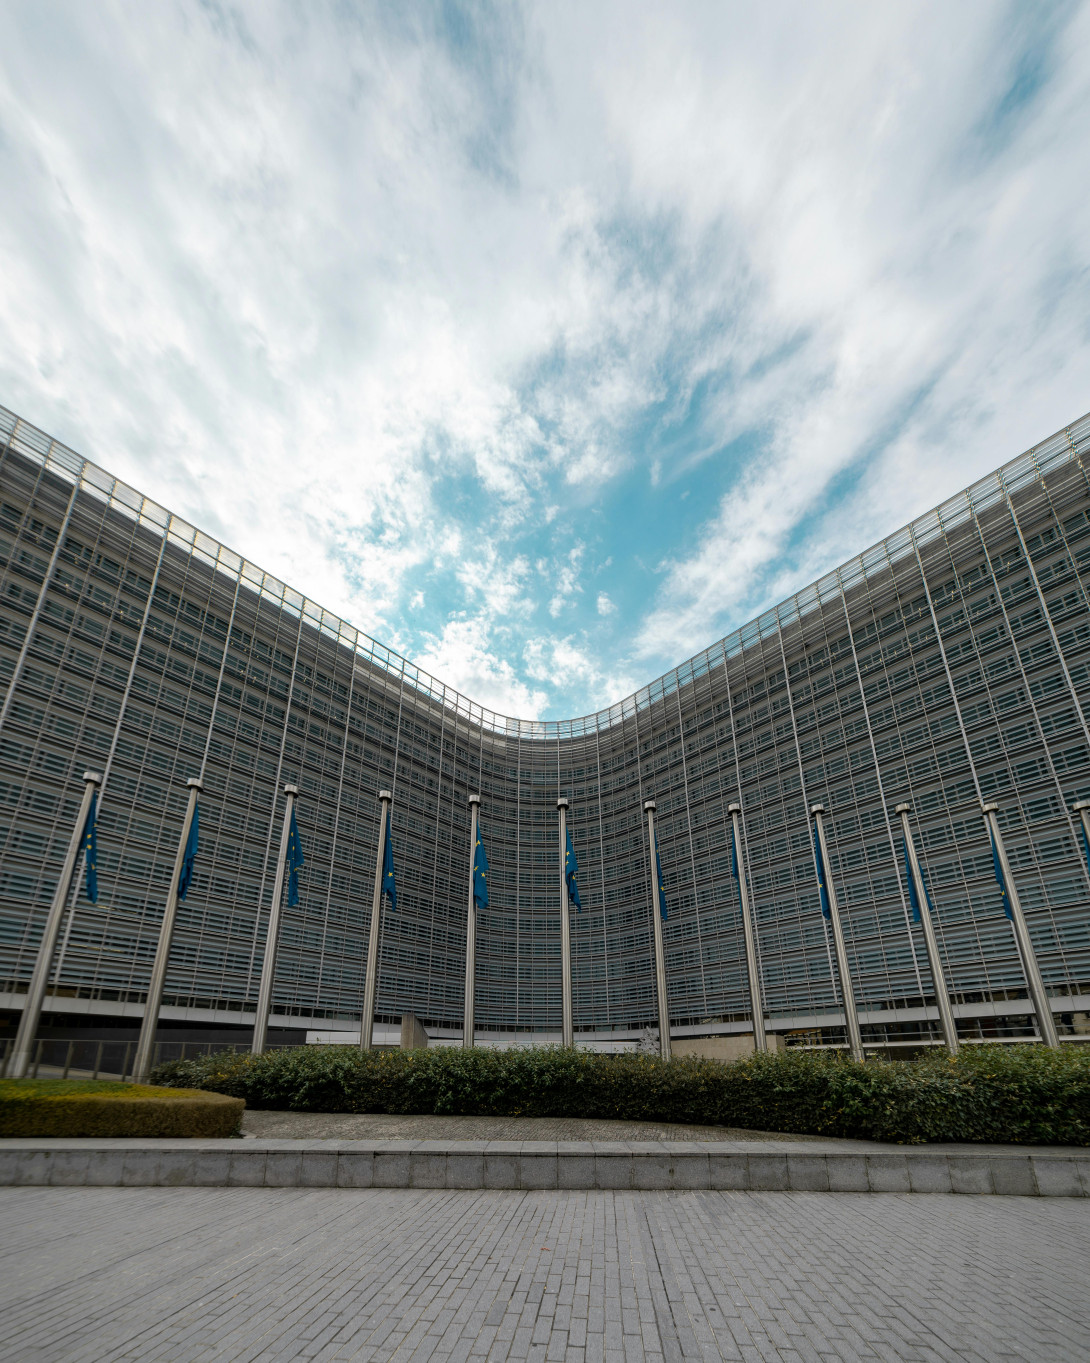 The Berlaymont Building of the European Commission